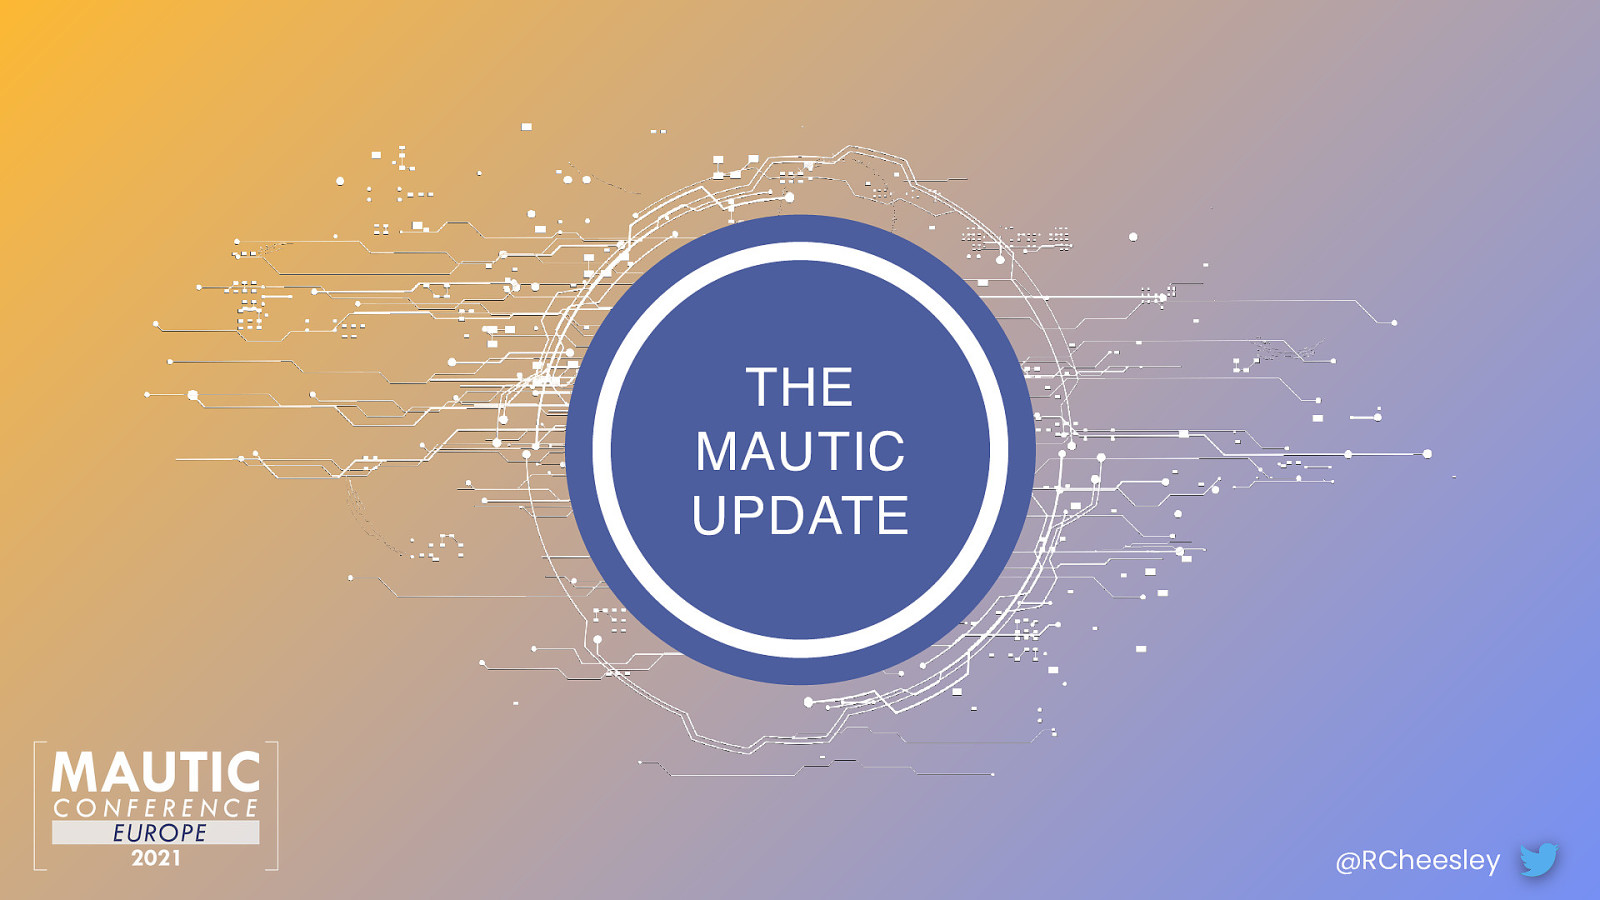 The Mautic Update